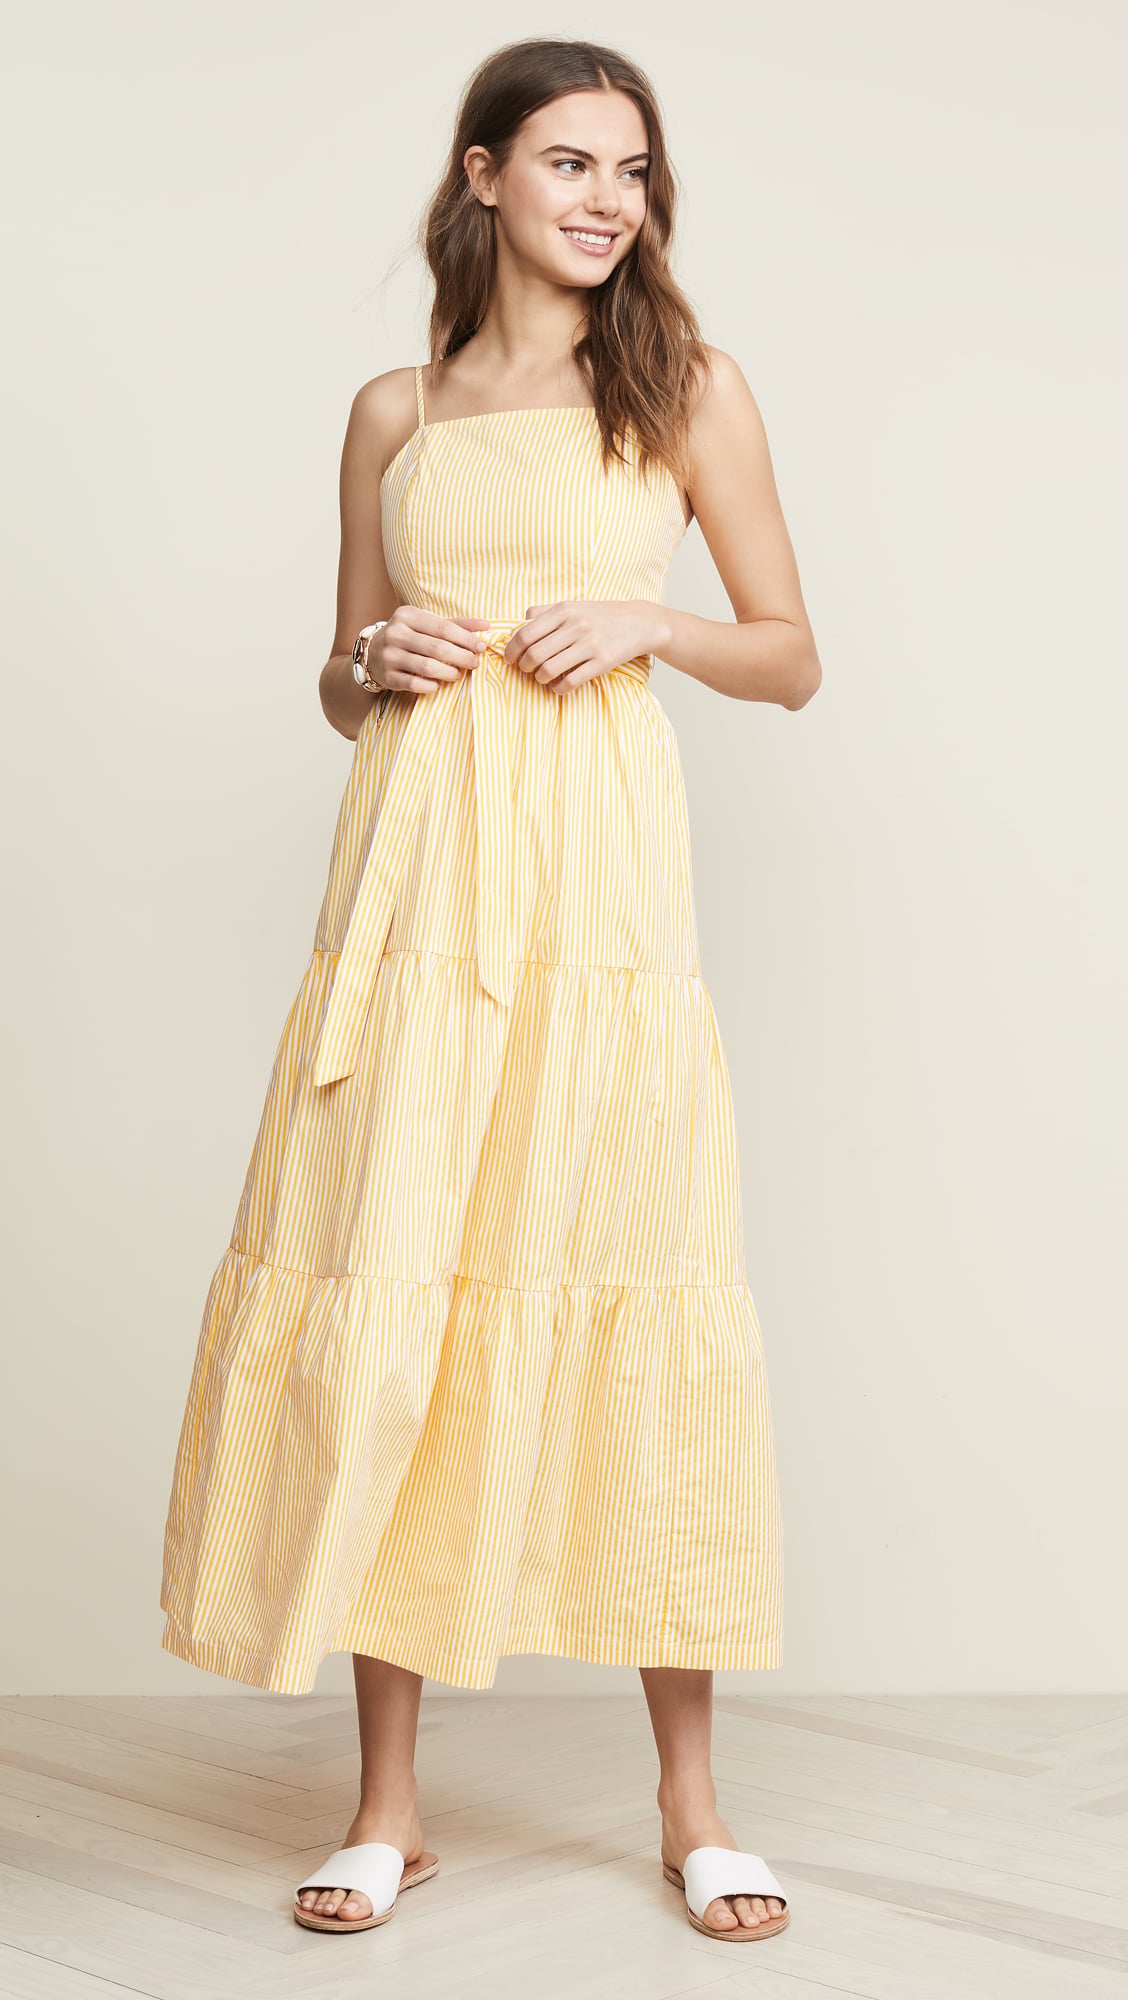 English Maxi Dress Online Deals, UP TO 59% OFF | www.realliganaval.com